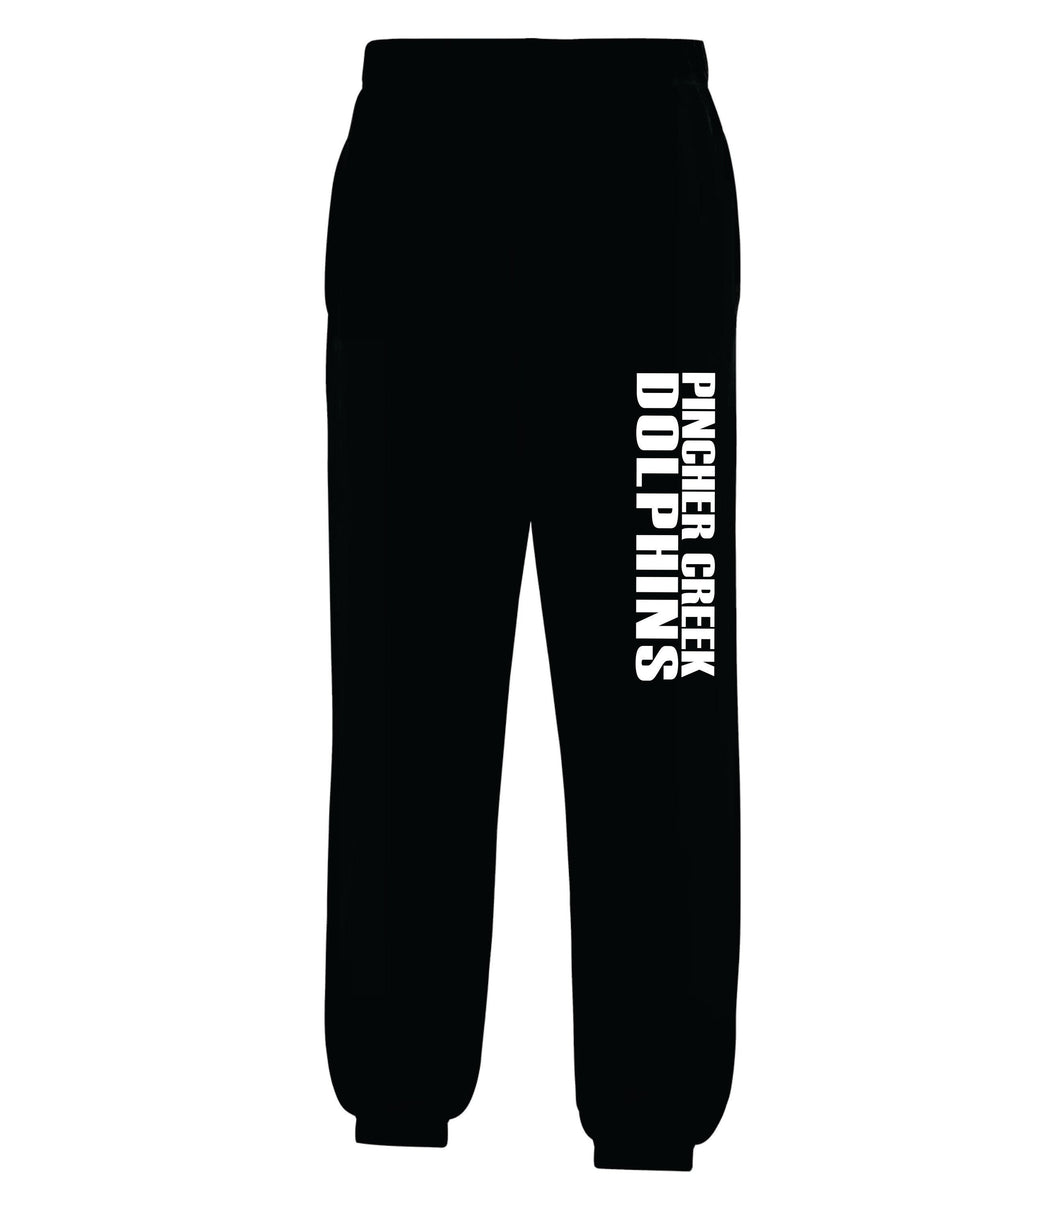 SWEAT PANTS, CUFFED BOTTOM - ATCY2800 - PC DOLPHINS LOGO - YOUTH - HP